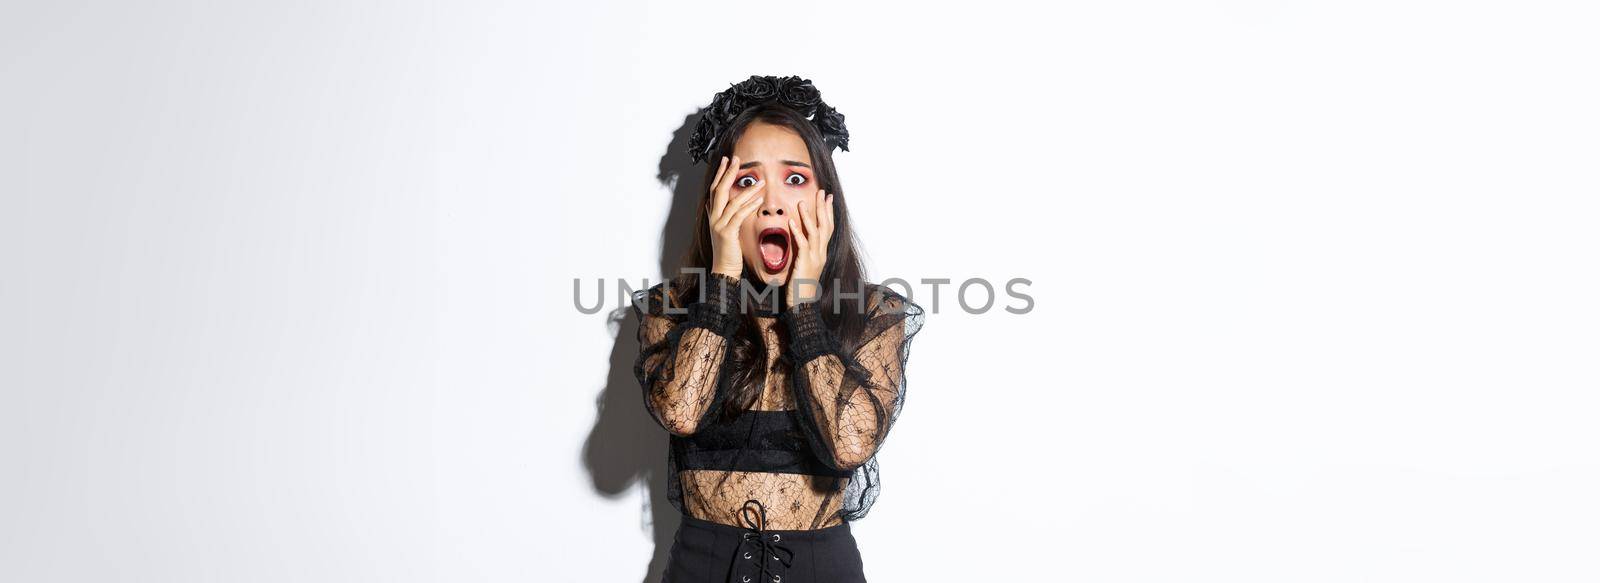 Image of scared young woman screaming and looking frightened at something creepy on halloween, wearing gothic dress and wreath, holding hands on face and trembling from fear.